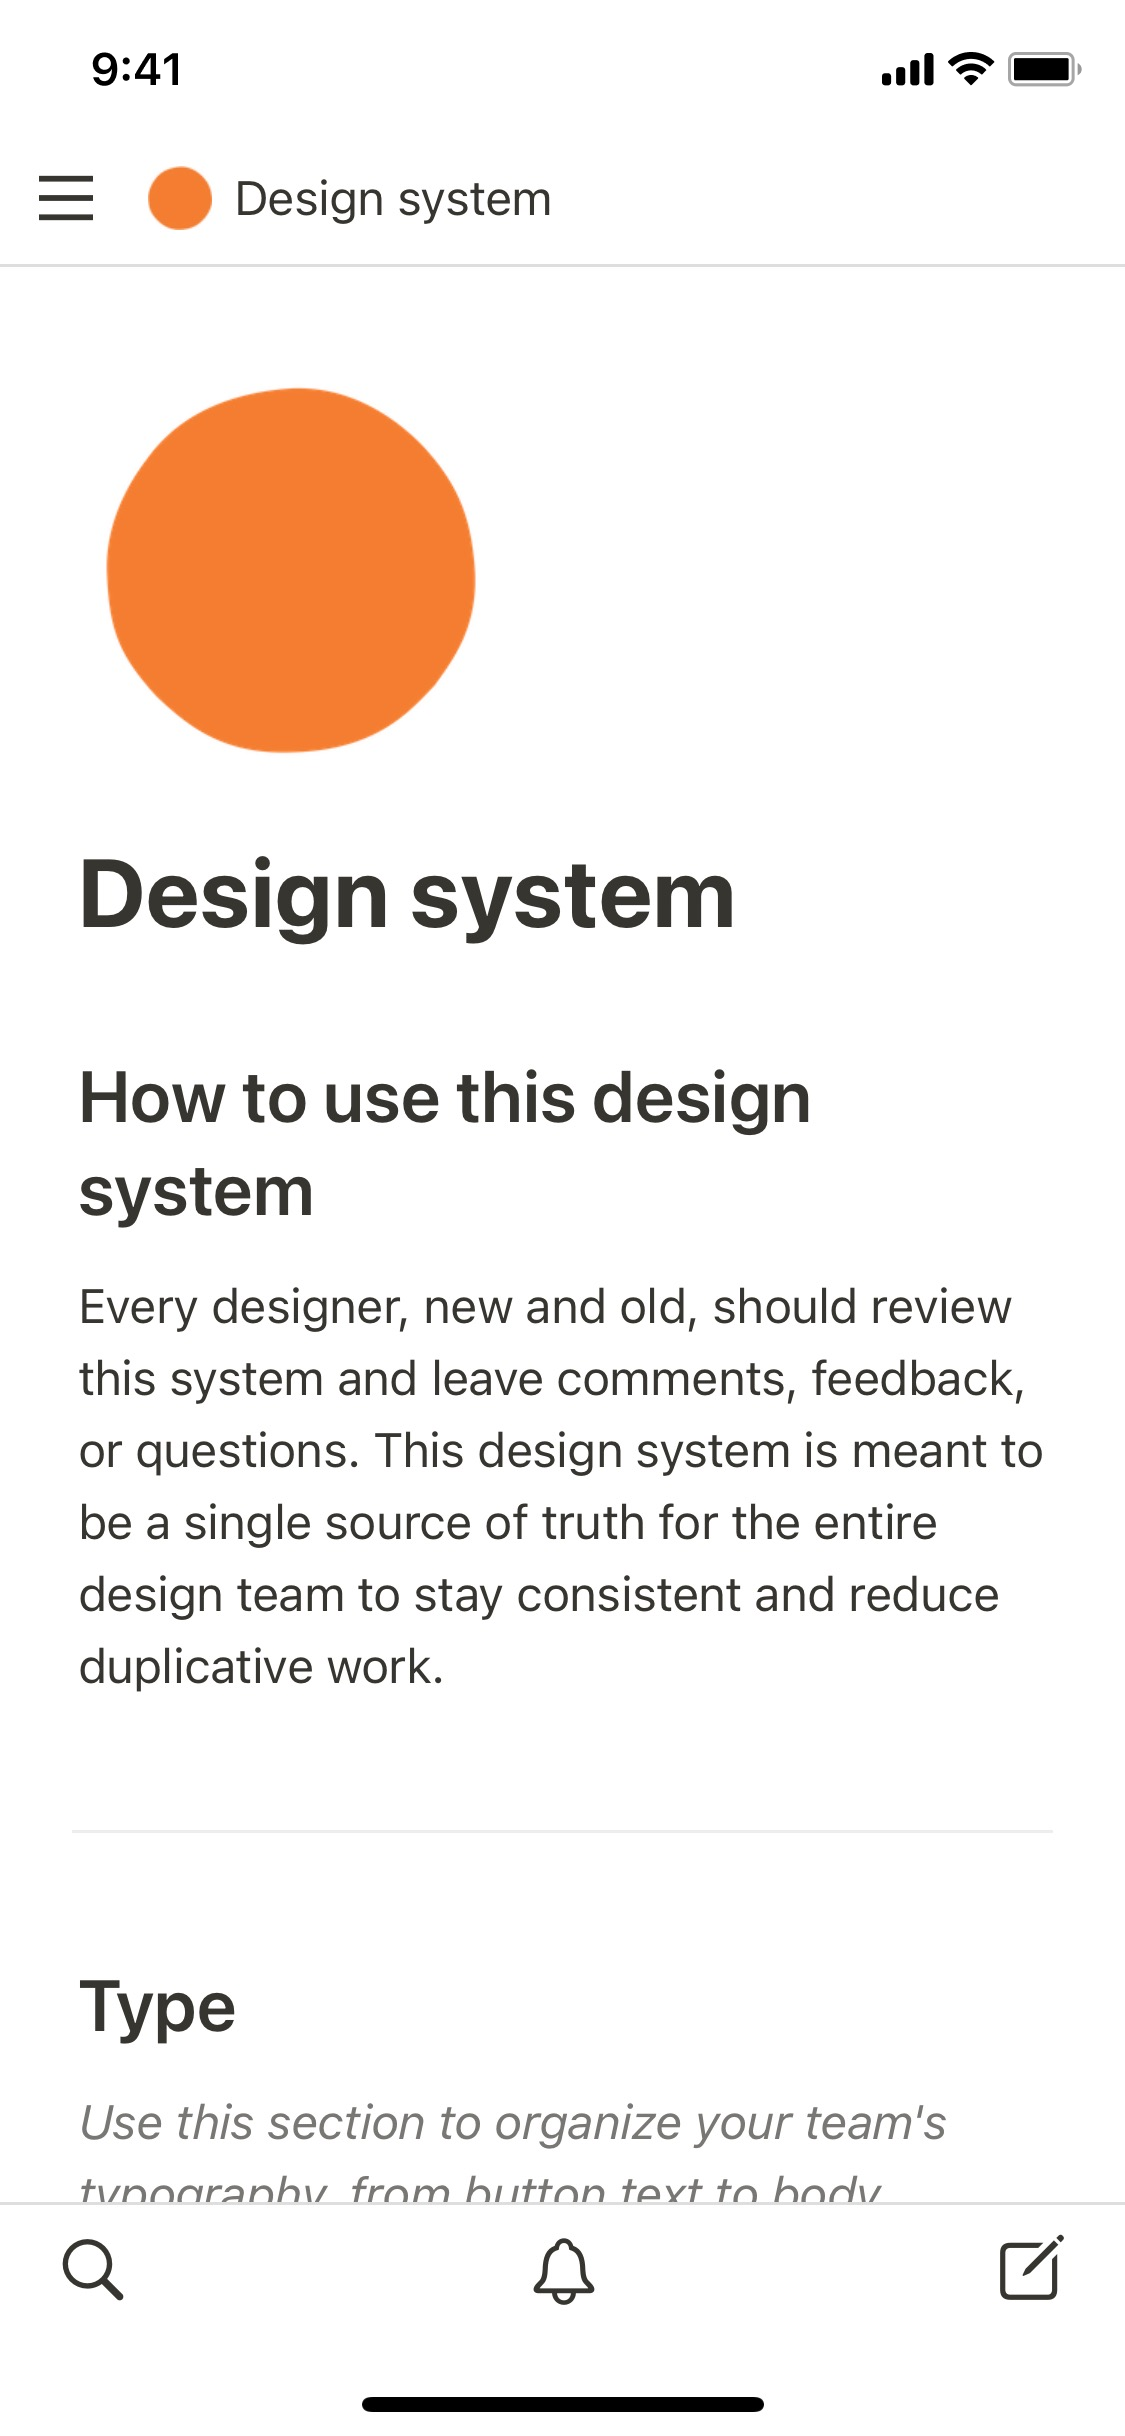 The mobile image for Headspace's design system template